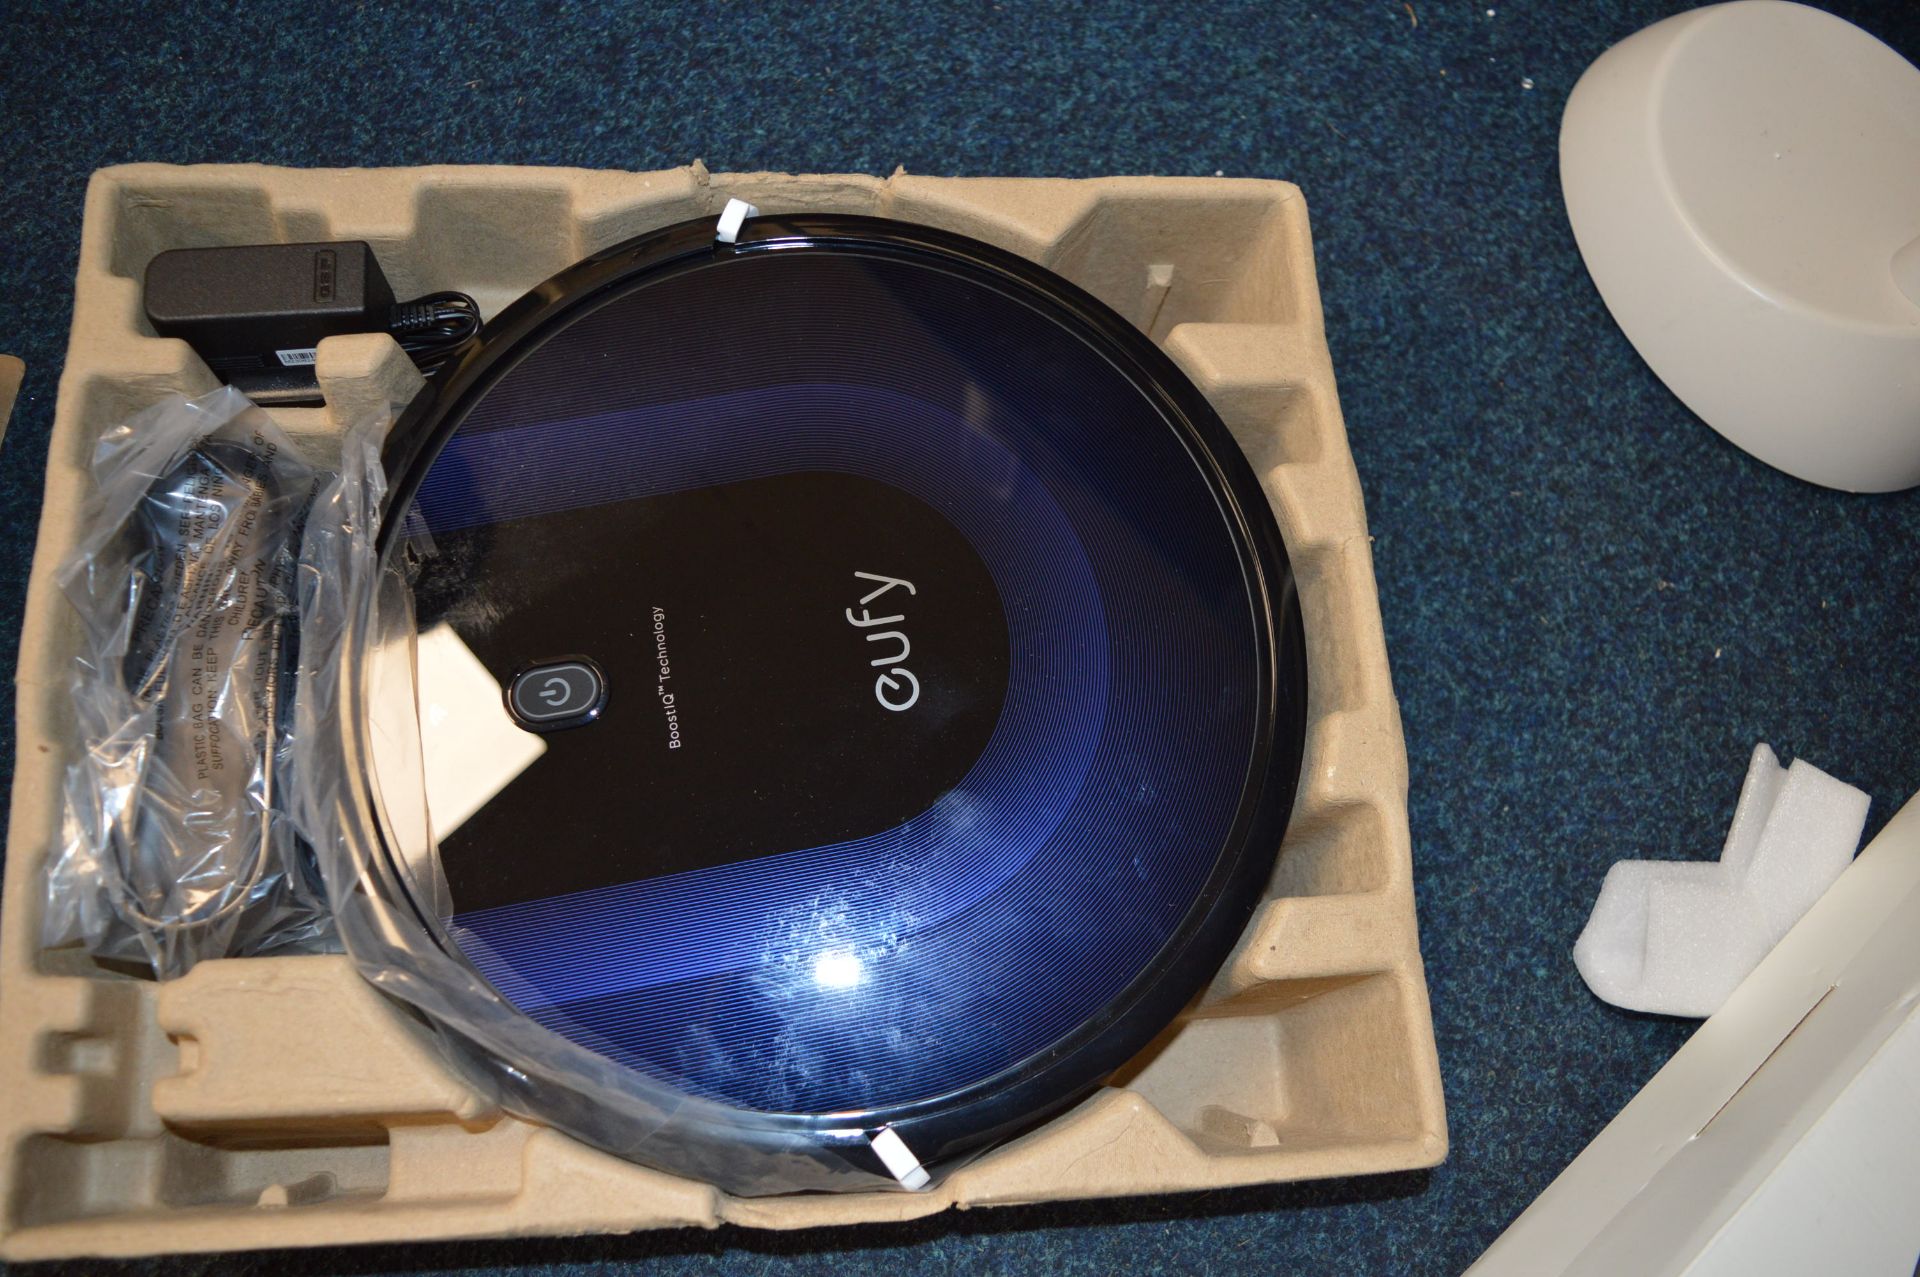 *Eufy Robot Vacuum Cleaner - Image 2 of 2